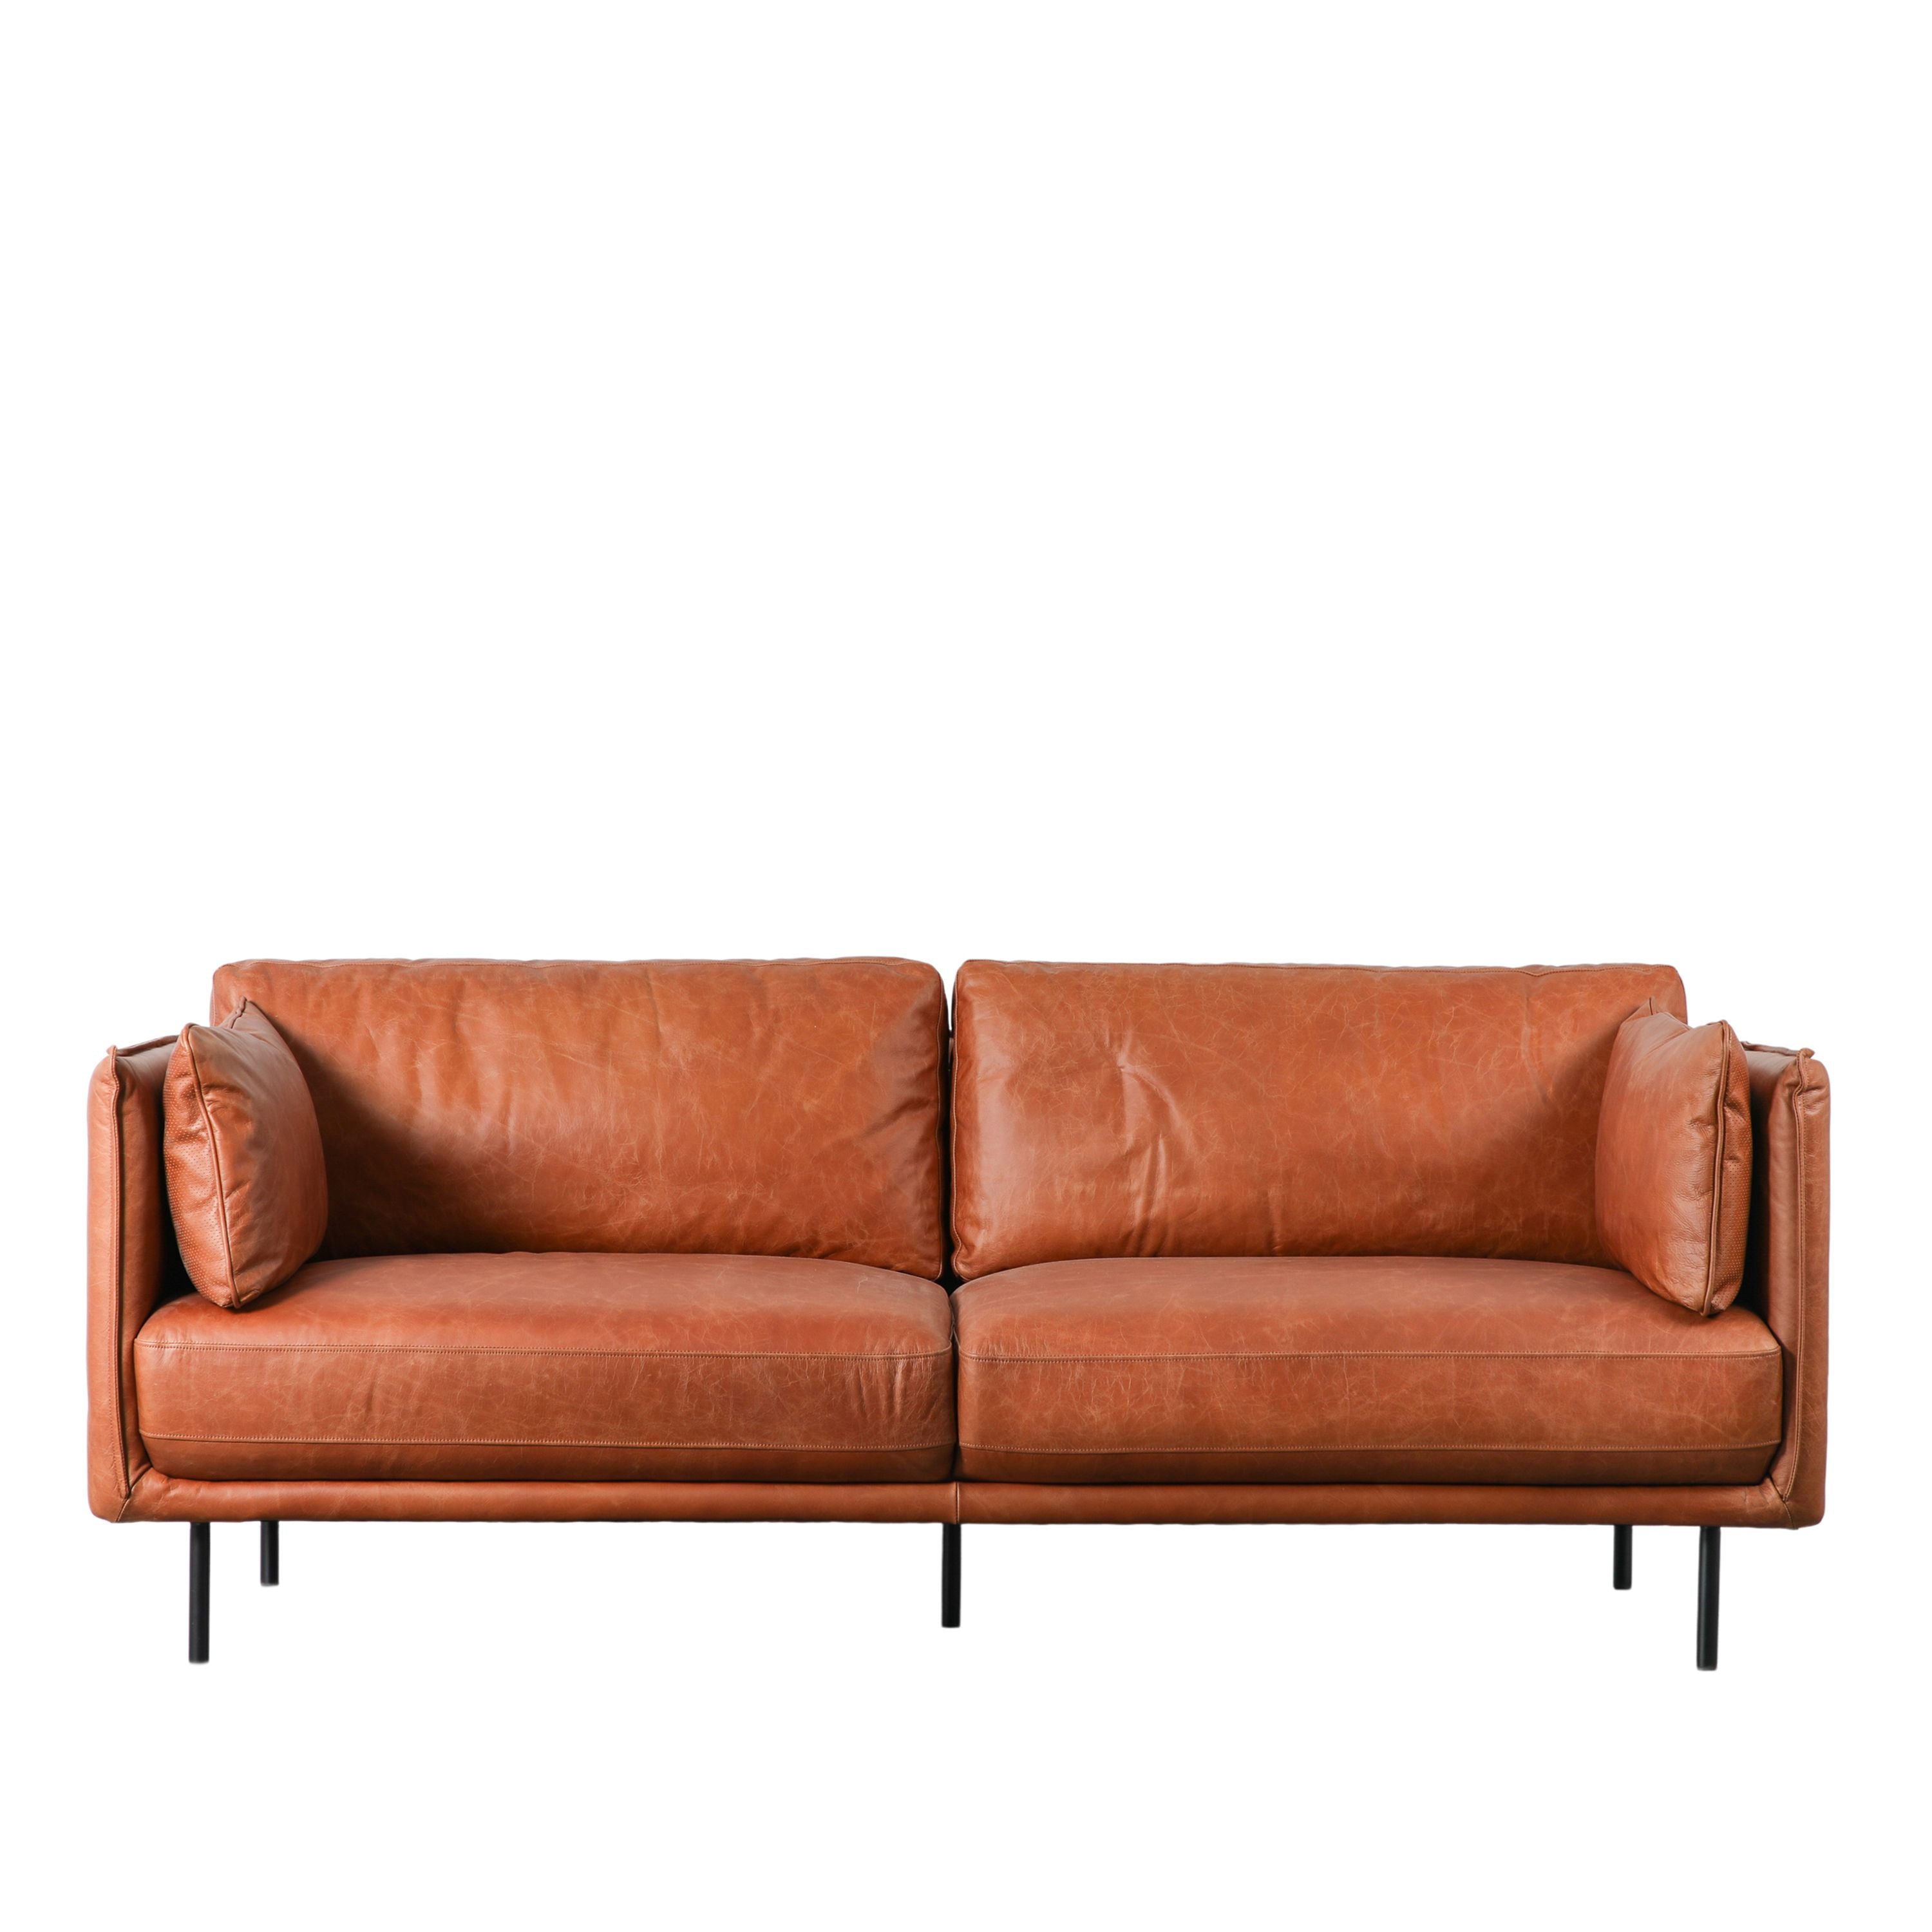 Wilmot Sofa Brown Leather - Vookoo Lifestyle